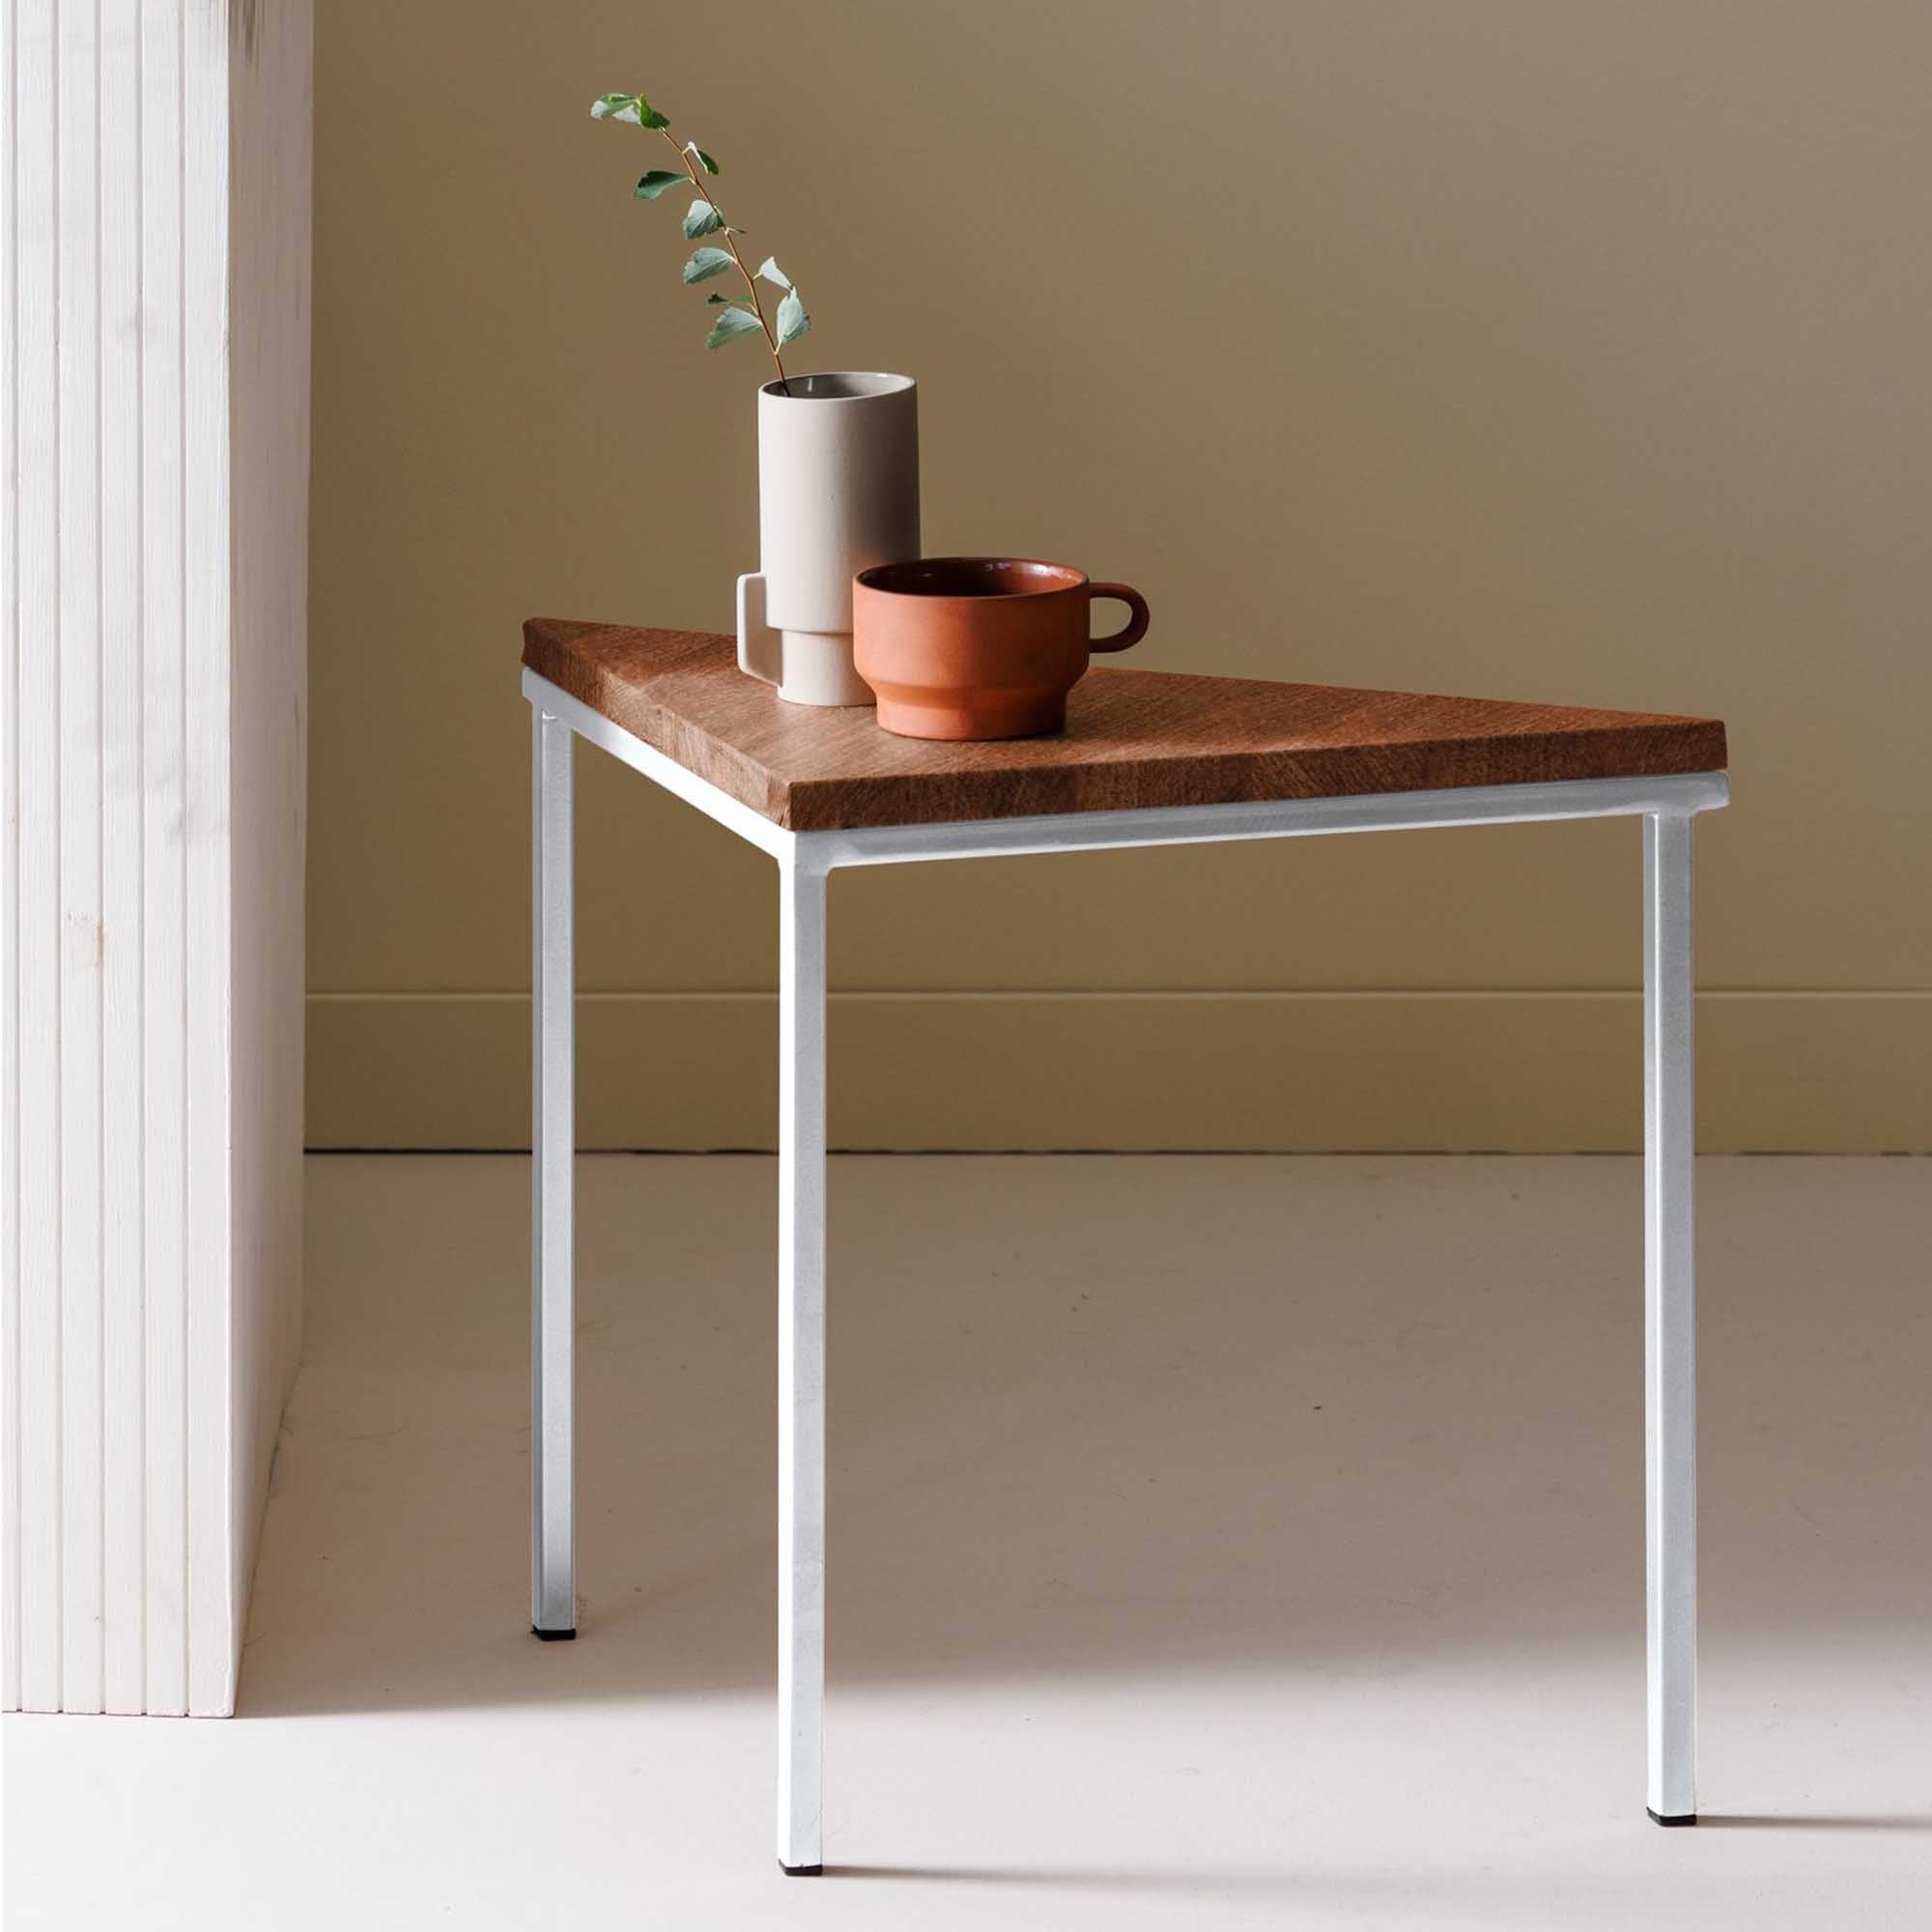 Tripod Table, Beech Wood, Walnut Colour white frame, interior view with vase and mug